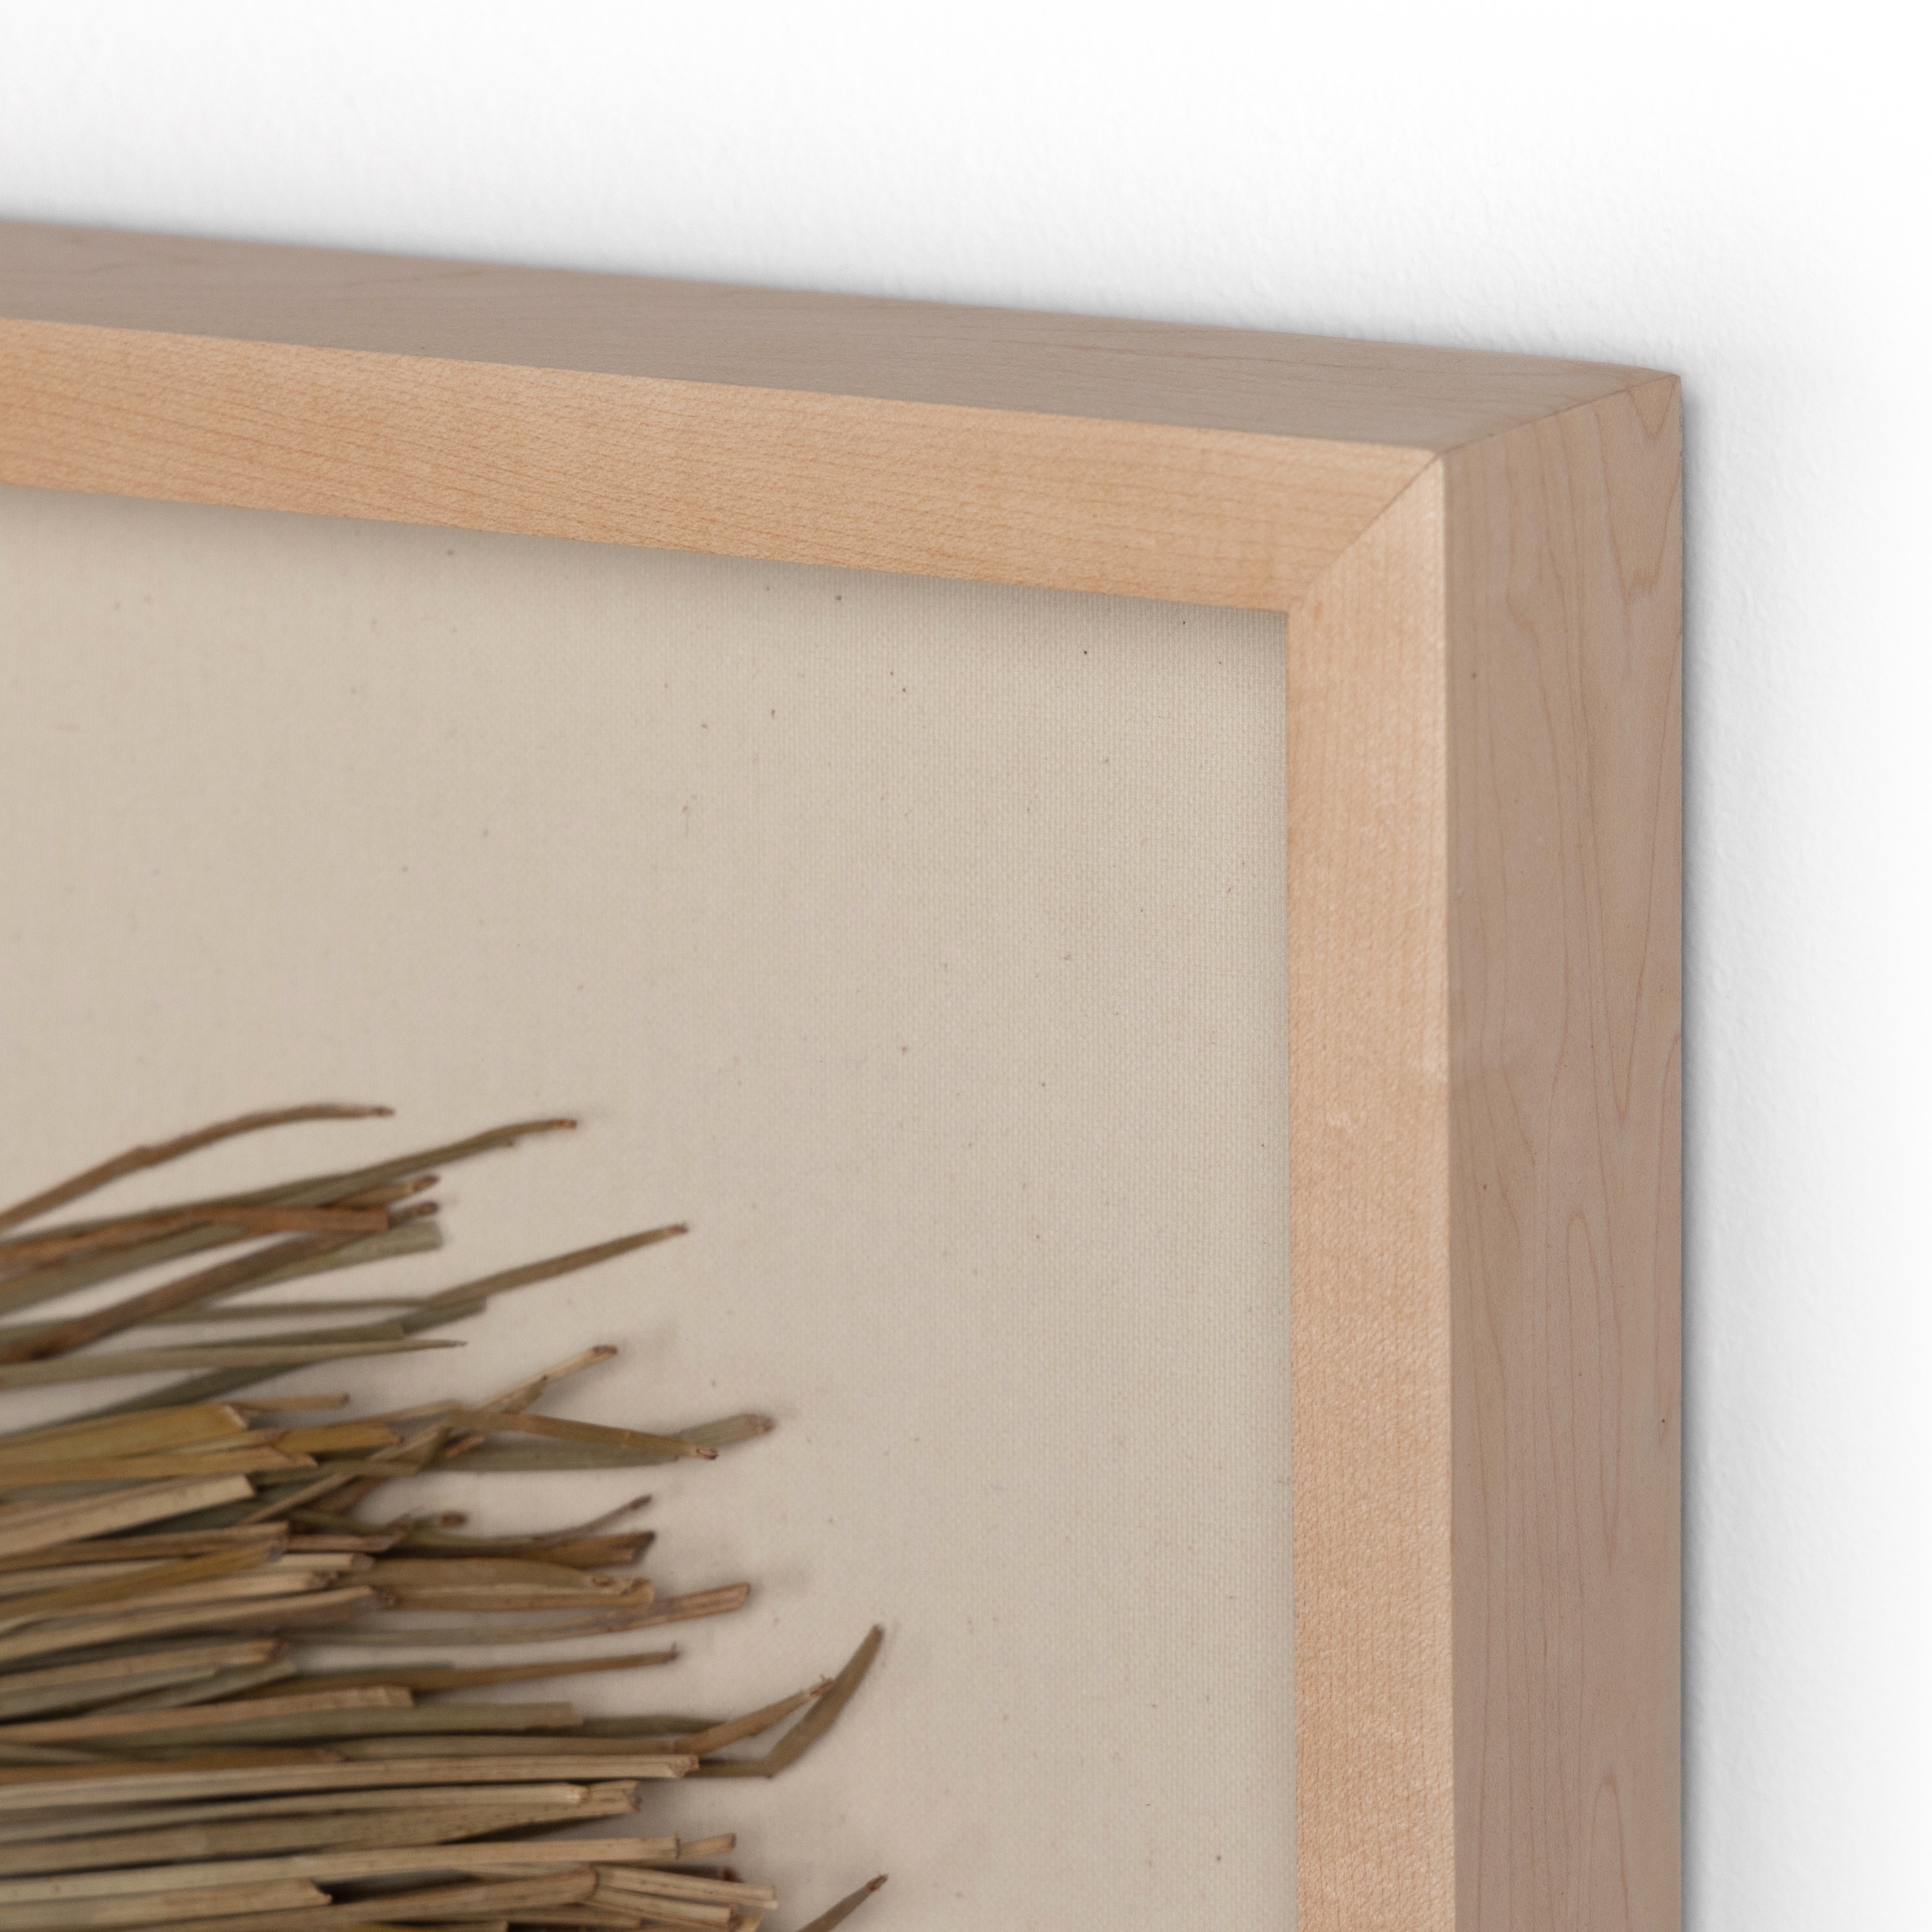 Beda Framed Seagrass Object - Image 3